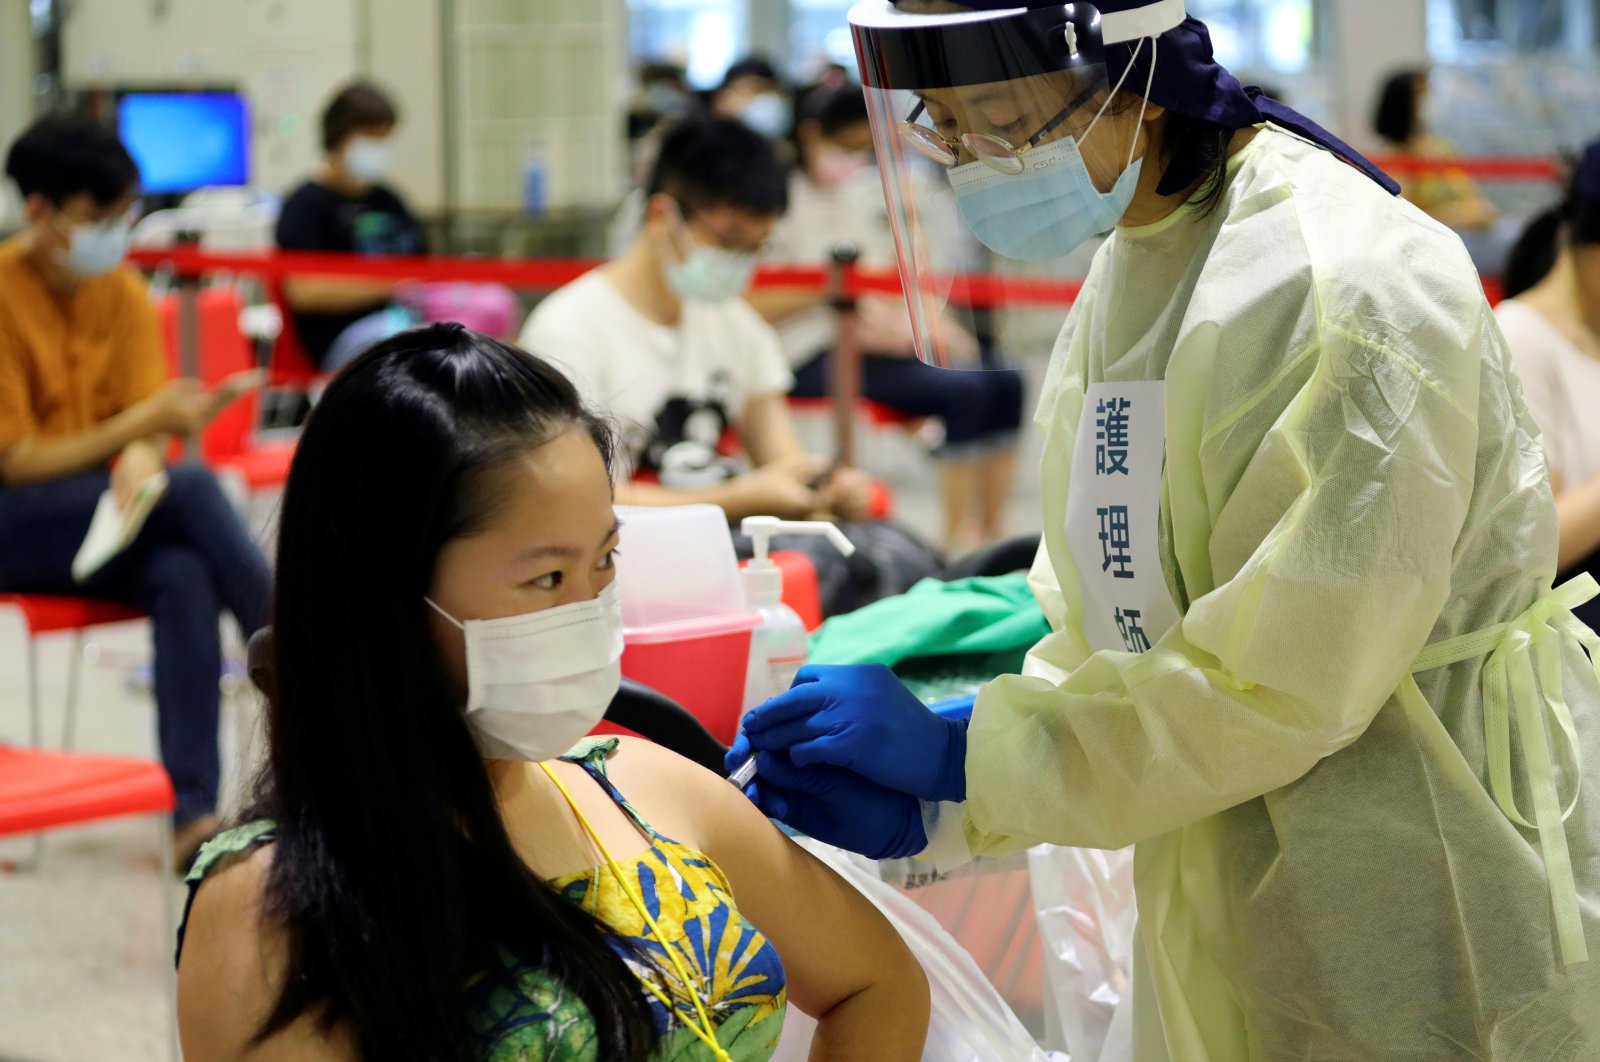 A medical worker administers a dose of the domestically developed Medigen Vaccine Biologics Corp.'s COVID-19 vaccine at a vaccination site in Taipei, Taiwan, Aug. 23, 2021. (Reuters Photo)